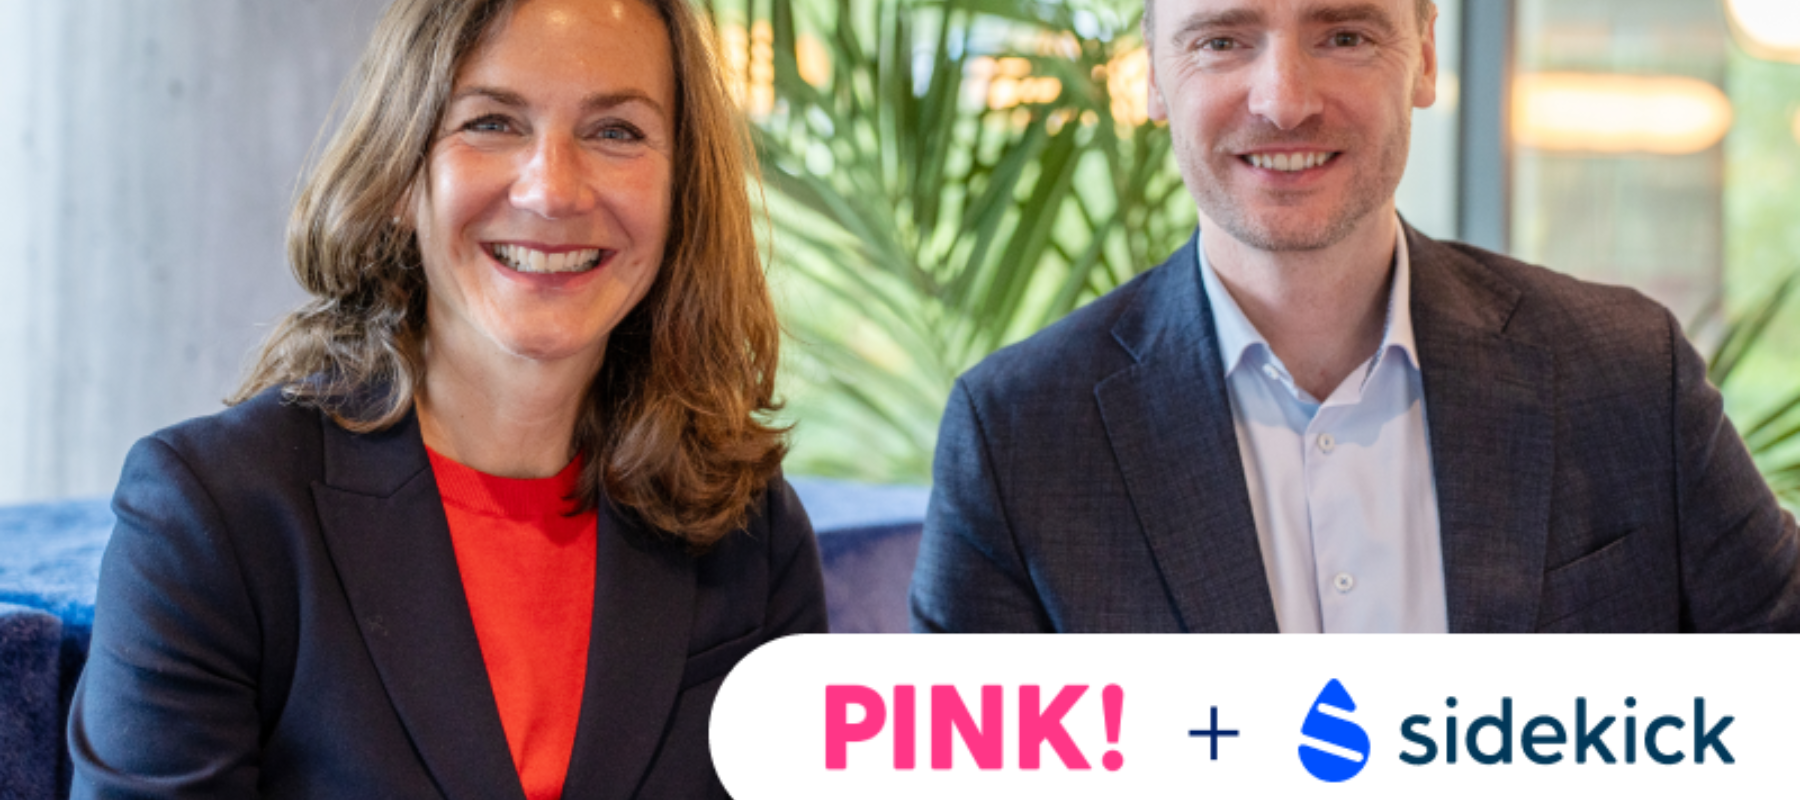 Sidekick Health expands oncology and women's health portfolio with acquisition of healthtech startup PINK!